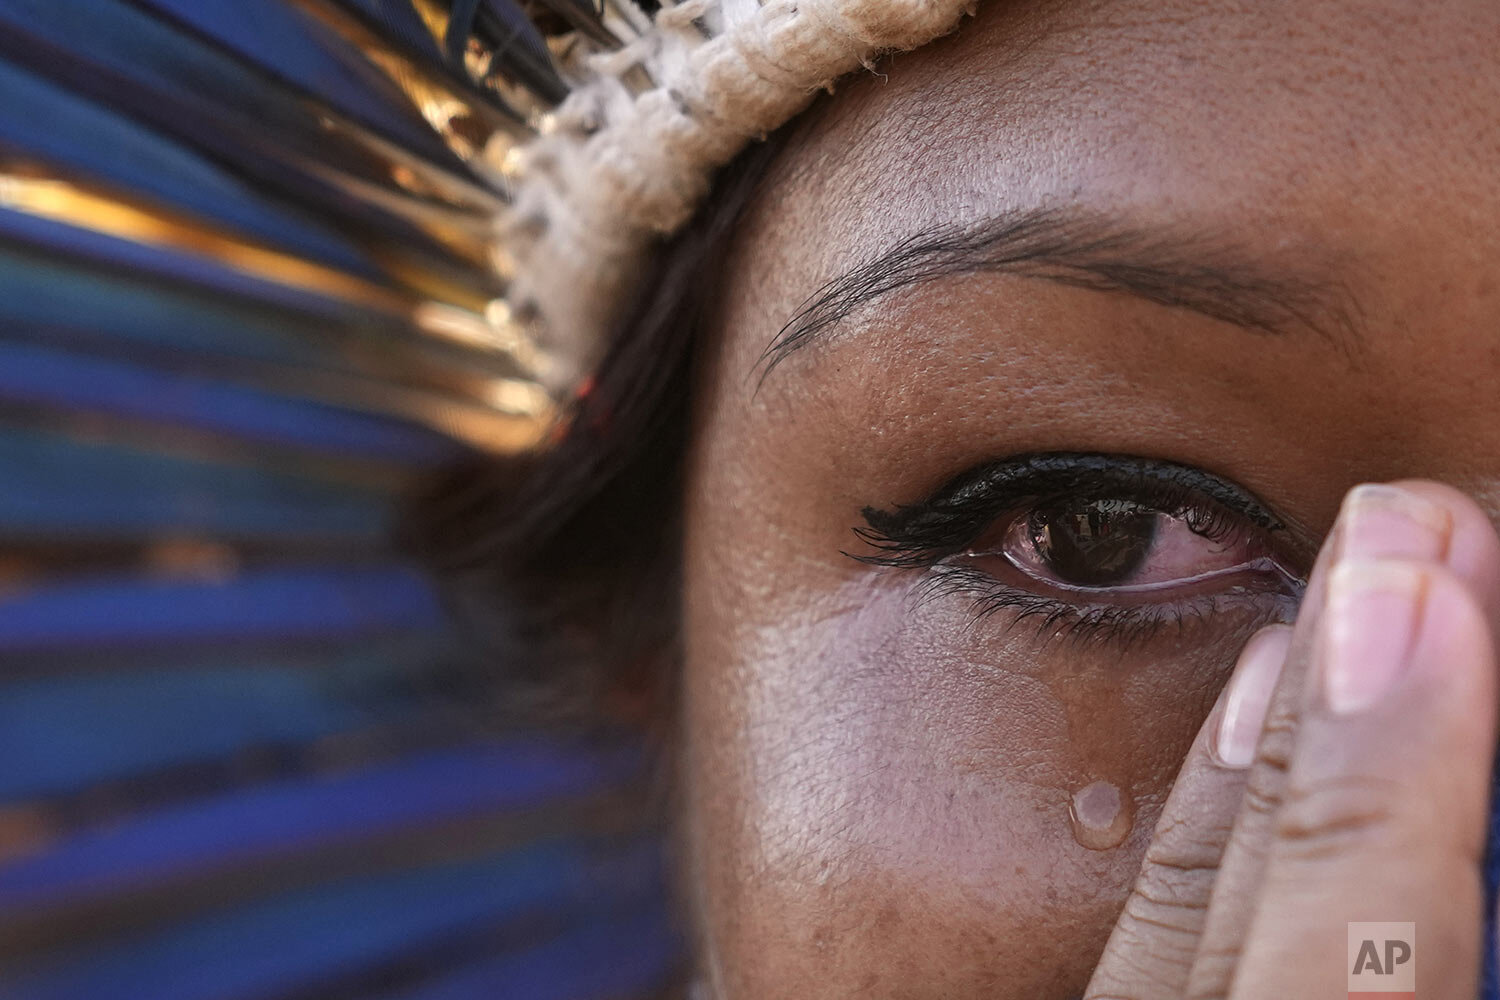  An Indigenous woman cries after judges suspended the vote on demarcating Indigenous lands, outside the Supreme Court in Brasilia, Brazil, Sept. 15, 2021. (AP Photo/Eraldo Peres) 